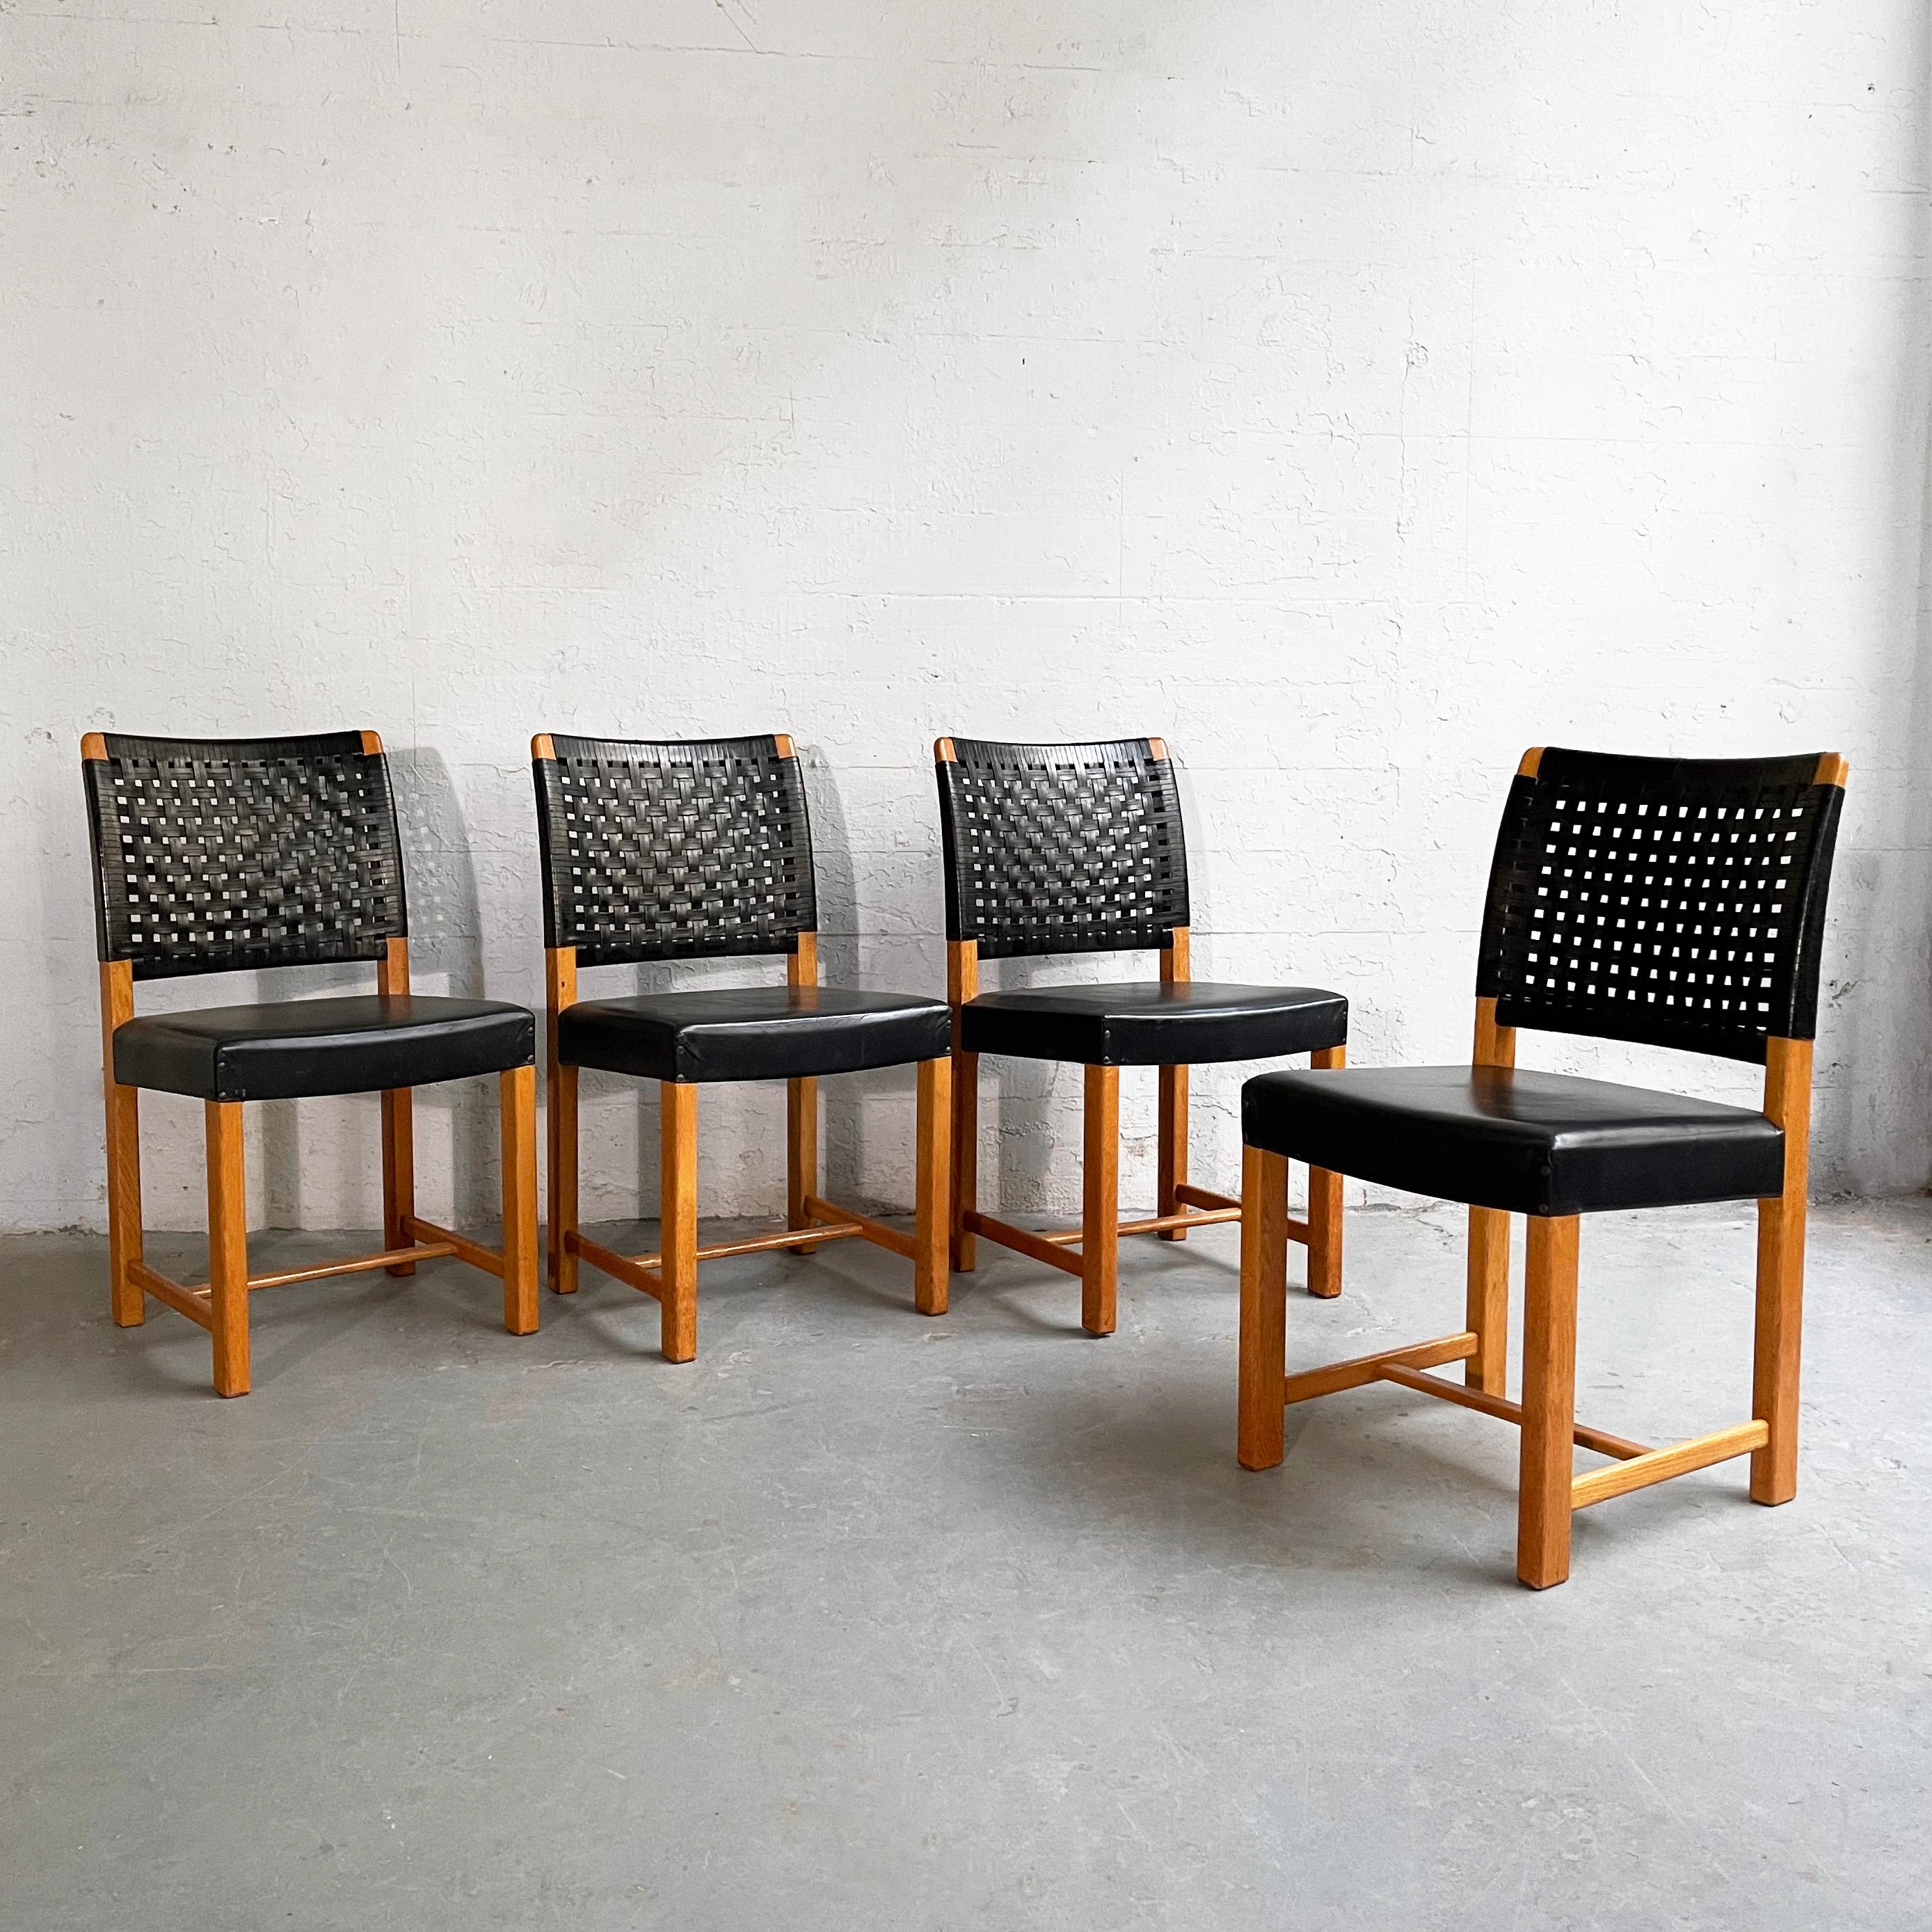 Set of four side dining chairs feature black woven leather backs with black leather seats.